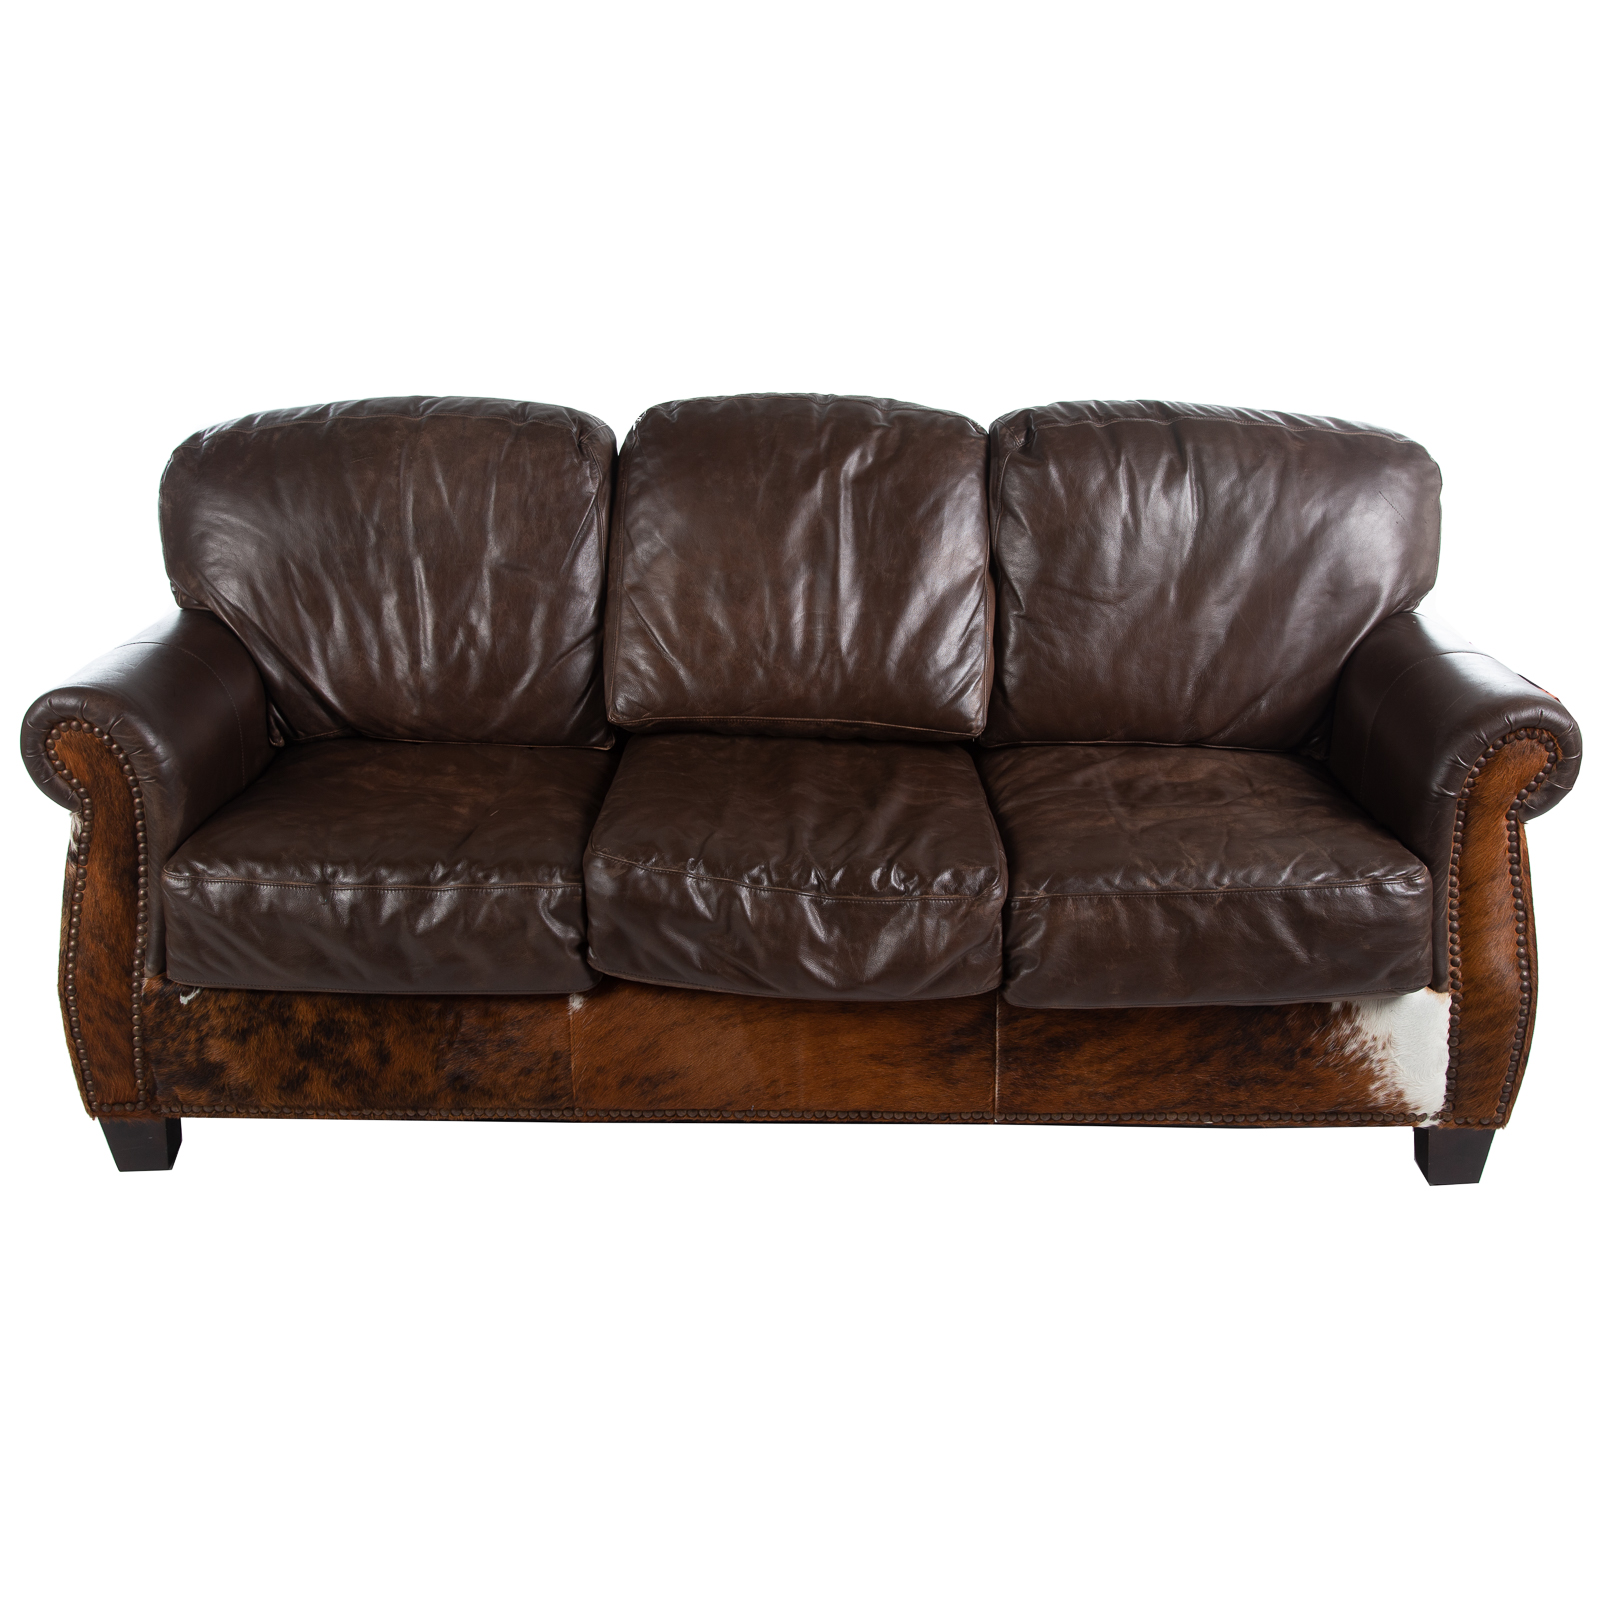 COWHIDE & LEATHER UPHOLSTERED SOFA